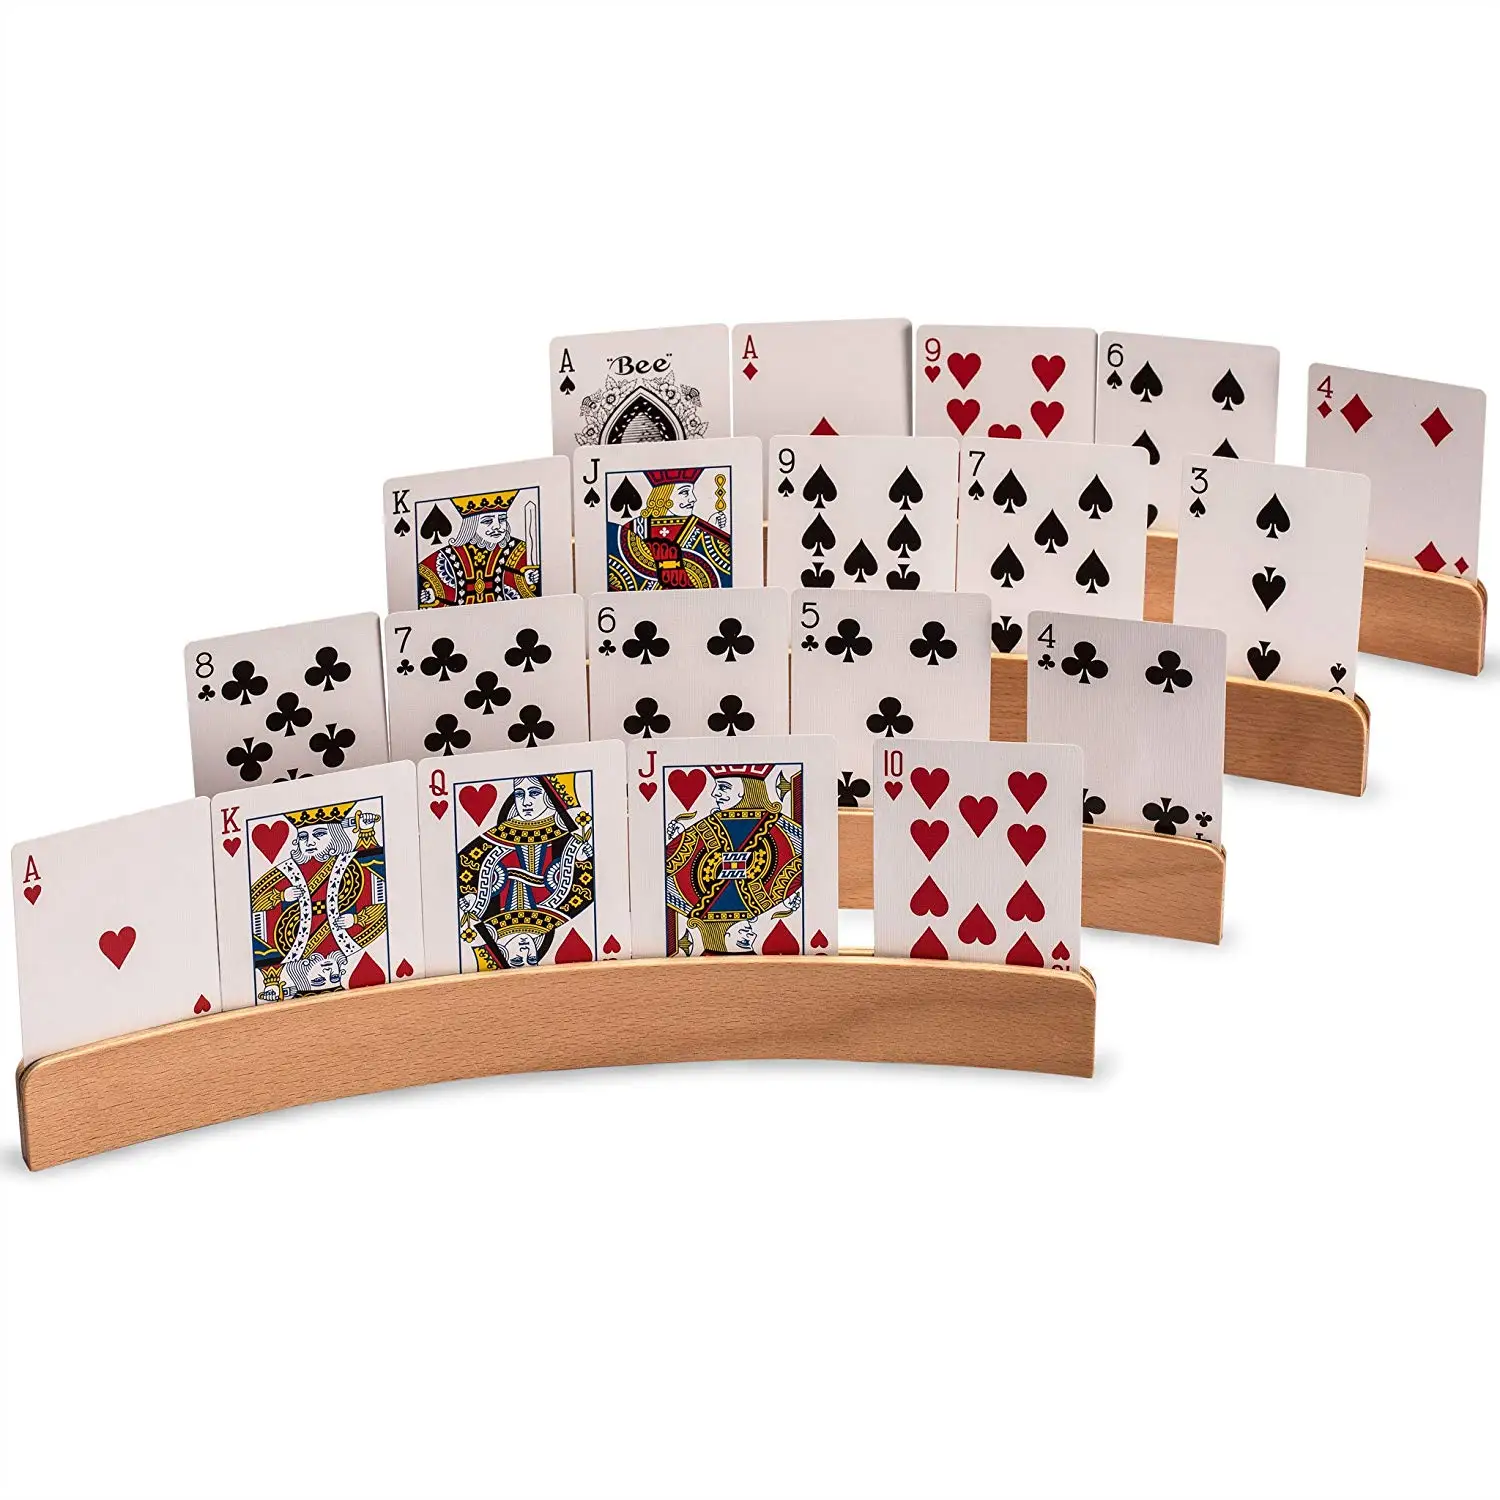 1Pcs Wooden Playing Card Holder Poker Party Playing Accessories Poker Base St Nt 